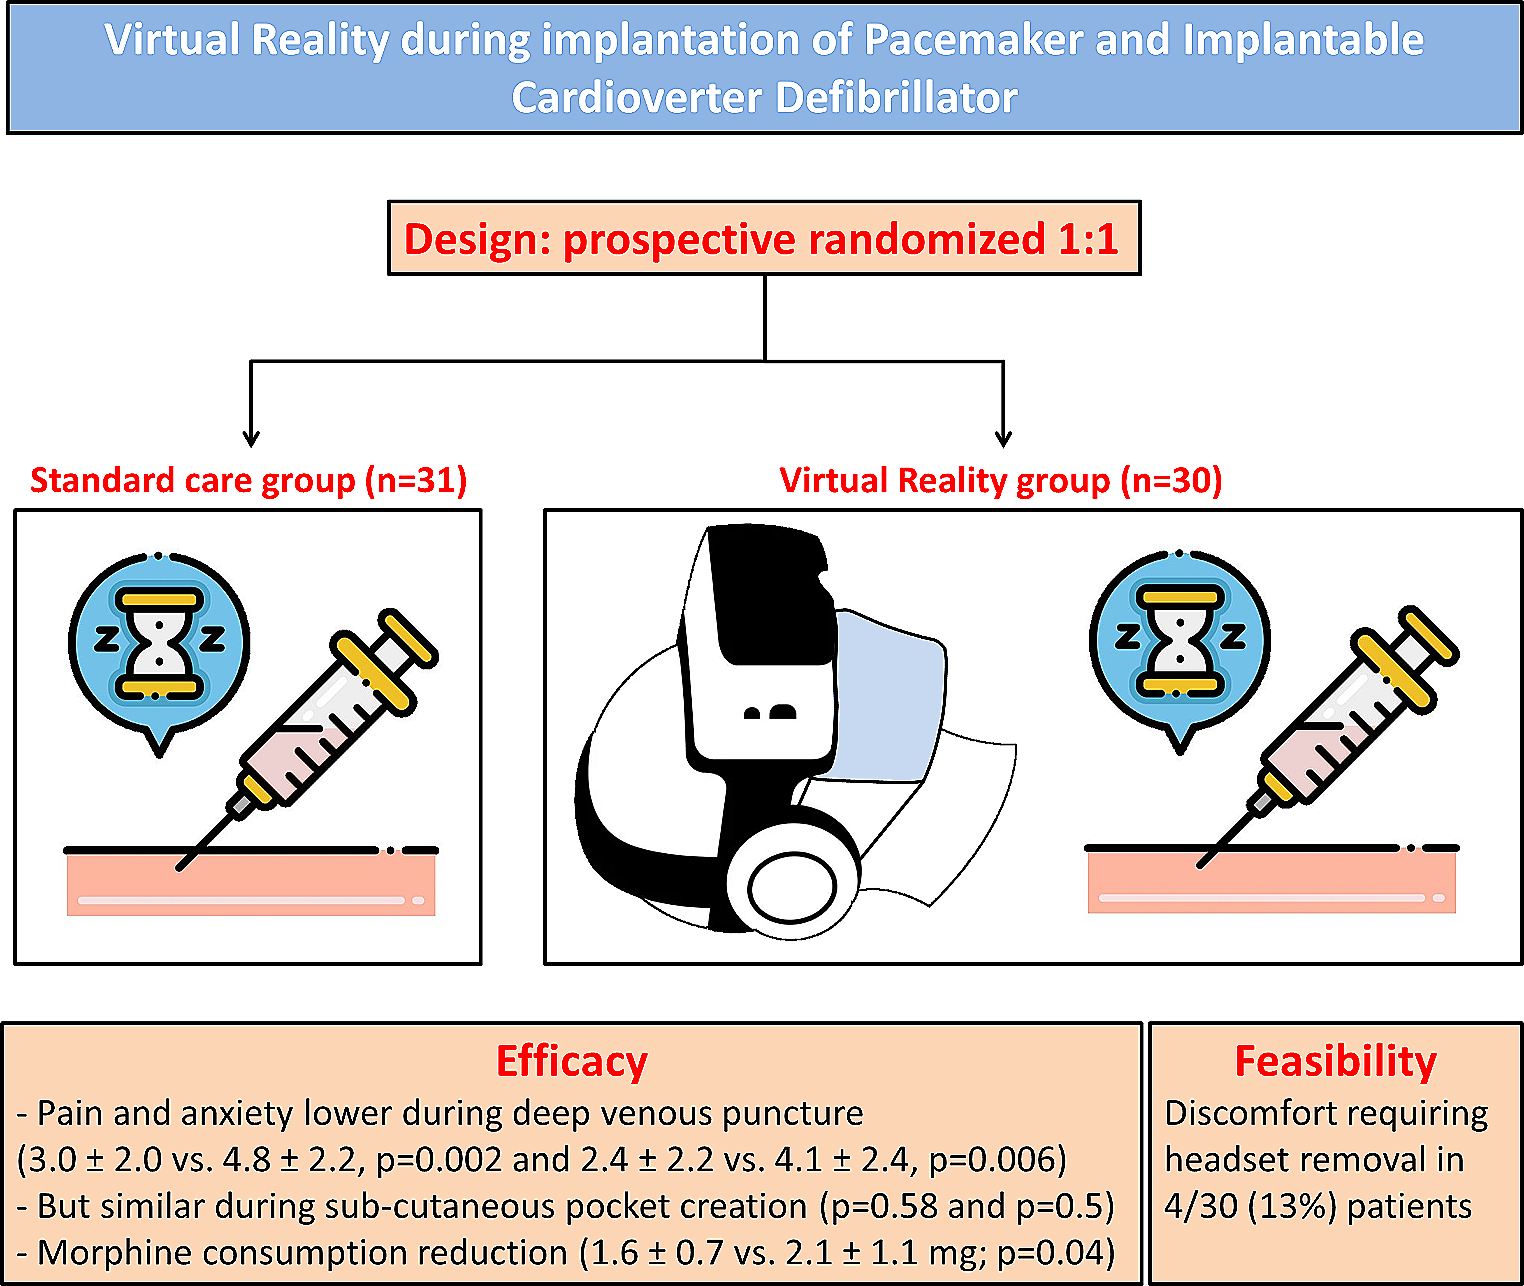 Virtual Reality for the Management of Pain and Anxiety in Patients Undergoing Implantation of Pacemaker or Implantable Cardioverter Defibrillator: A Randomized Study